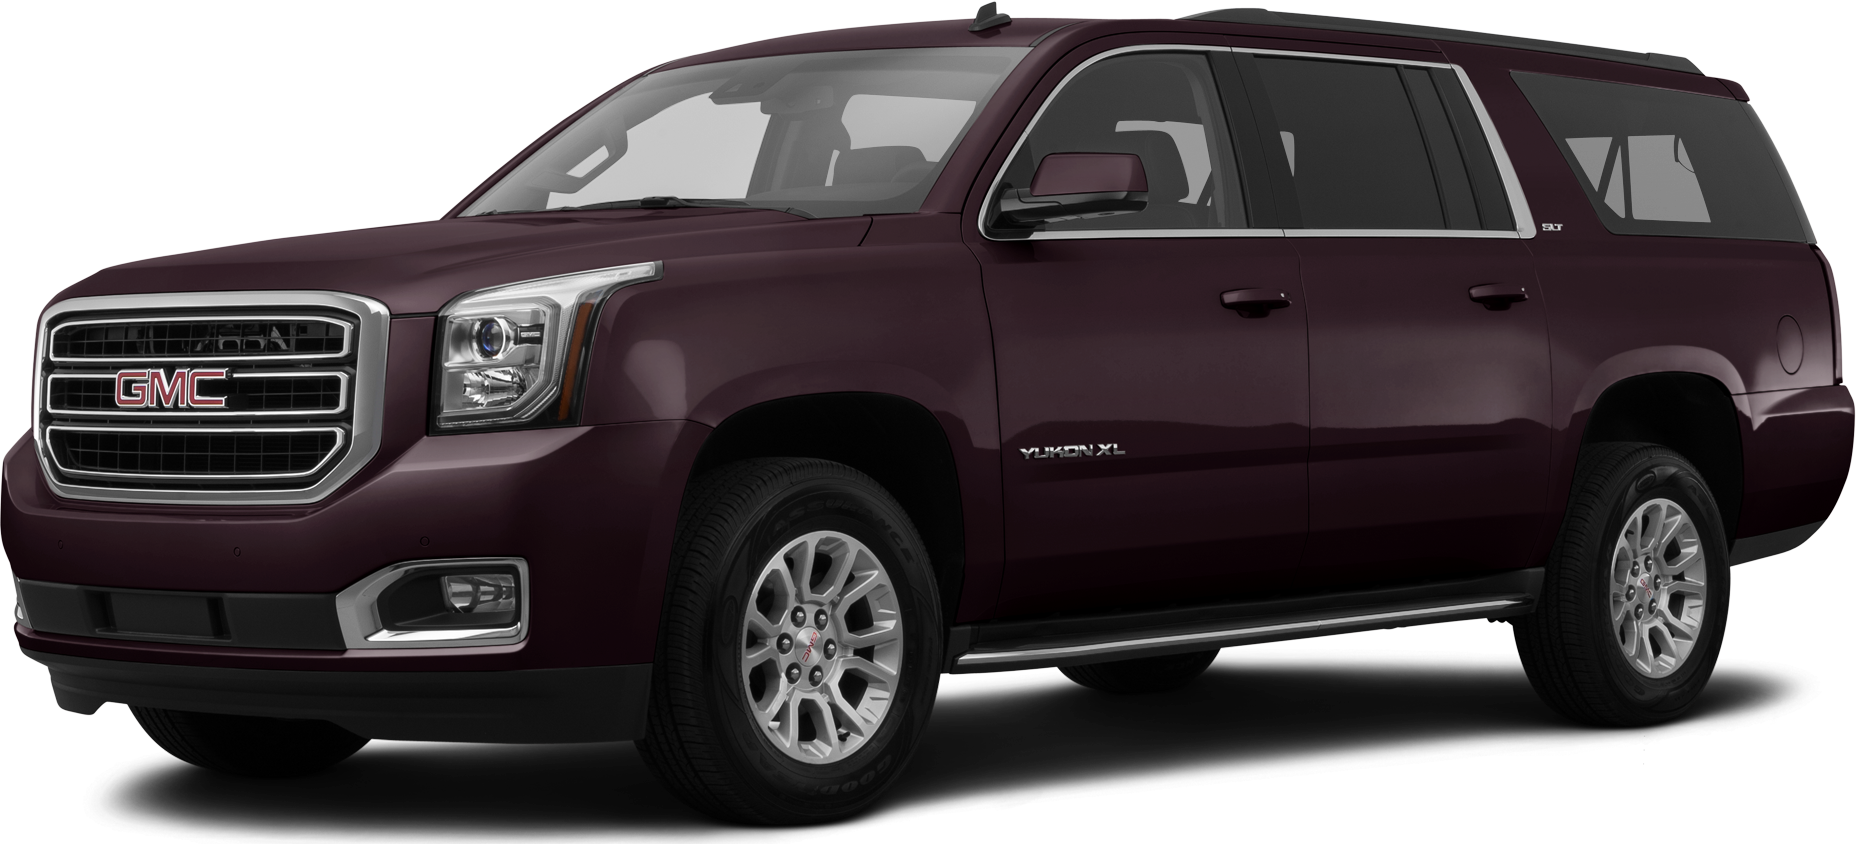 2015 Gmc Yukon Xl Price Value Ratings And Reviews Kelley Blue Book 6774